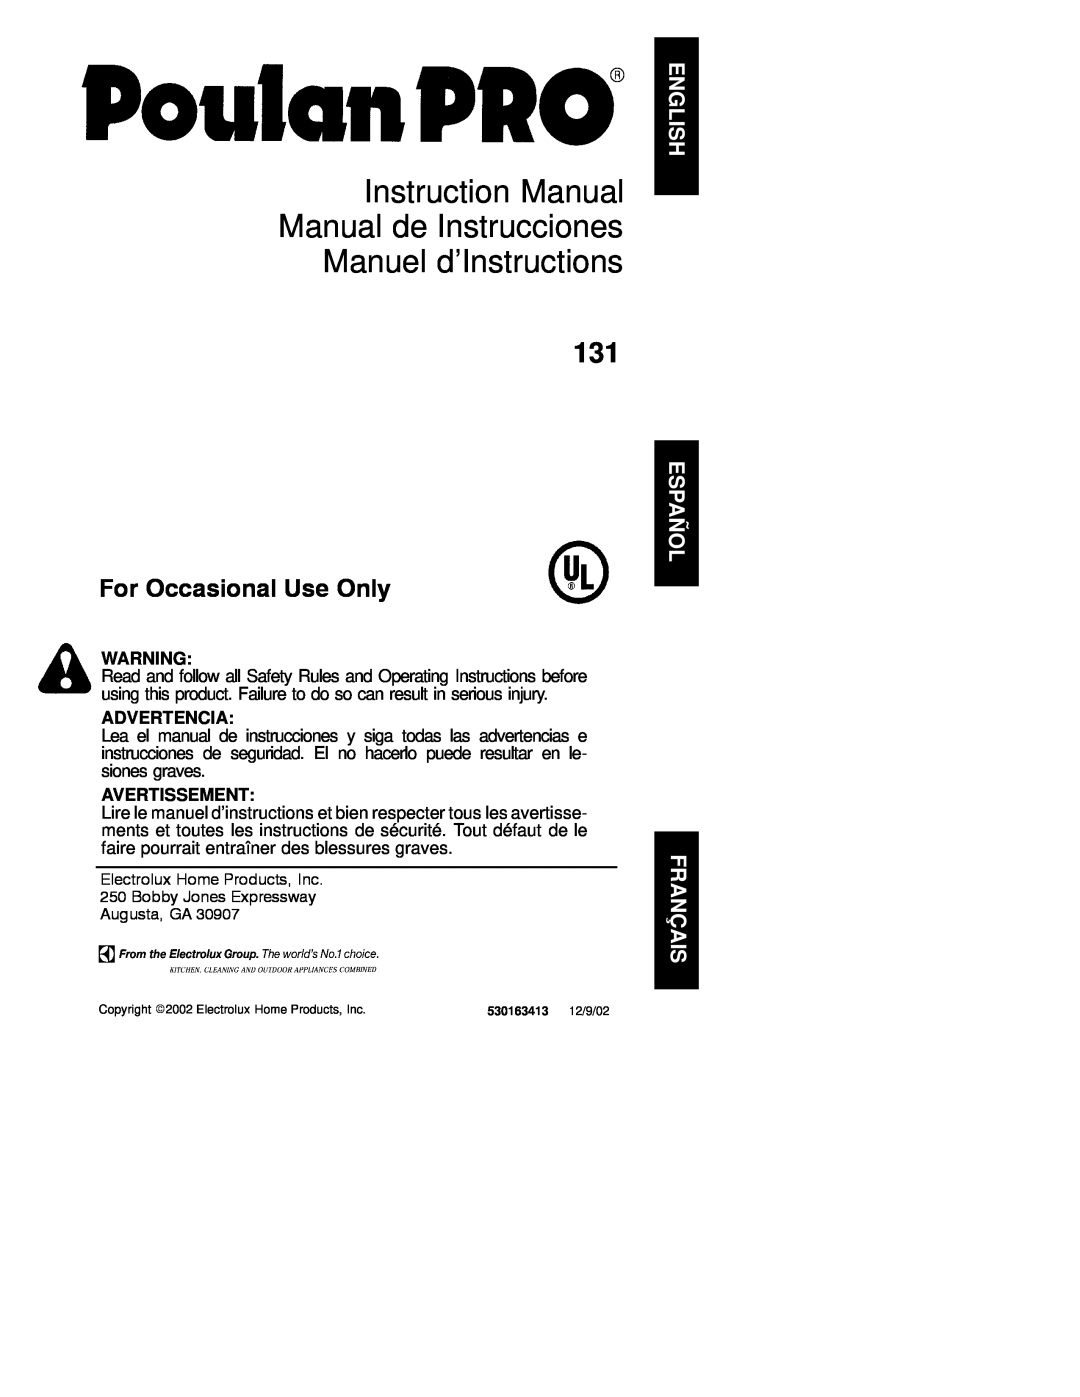 Poulan 131 instruction manual Manuel d’Instructions, For Occasional Use Only, Advertencia, Avertissement 